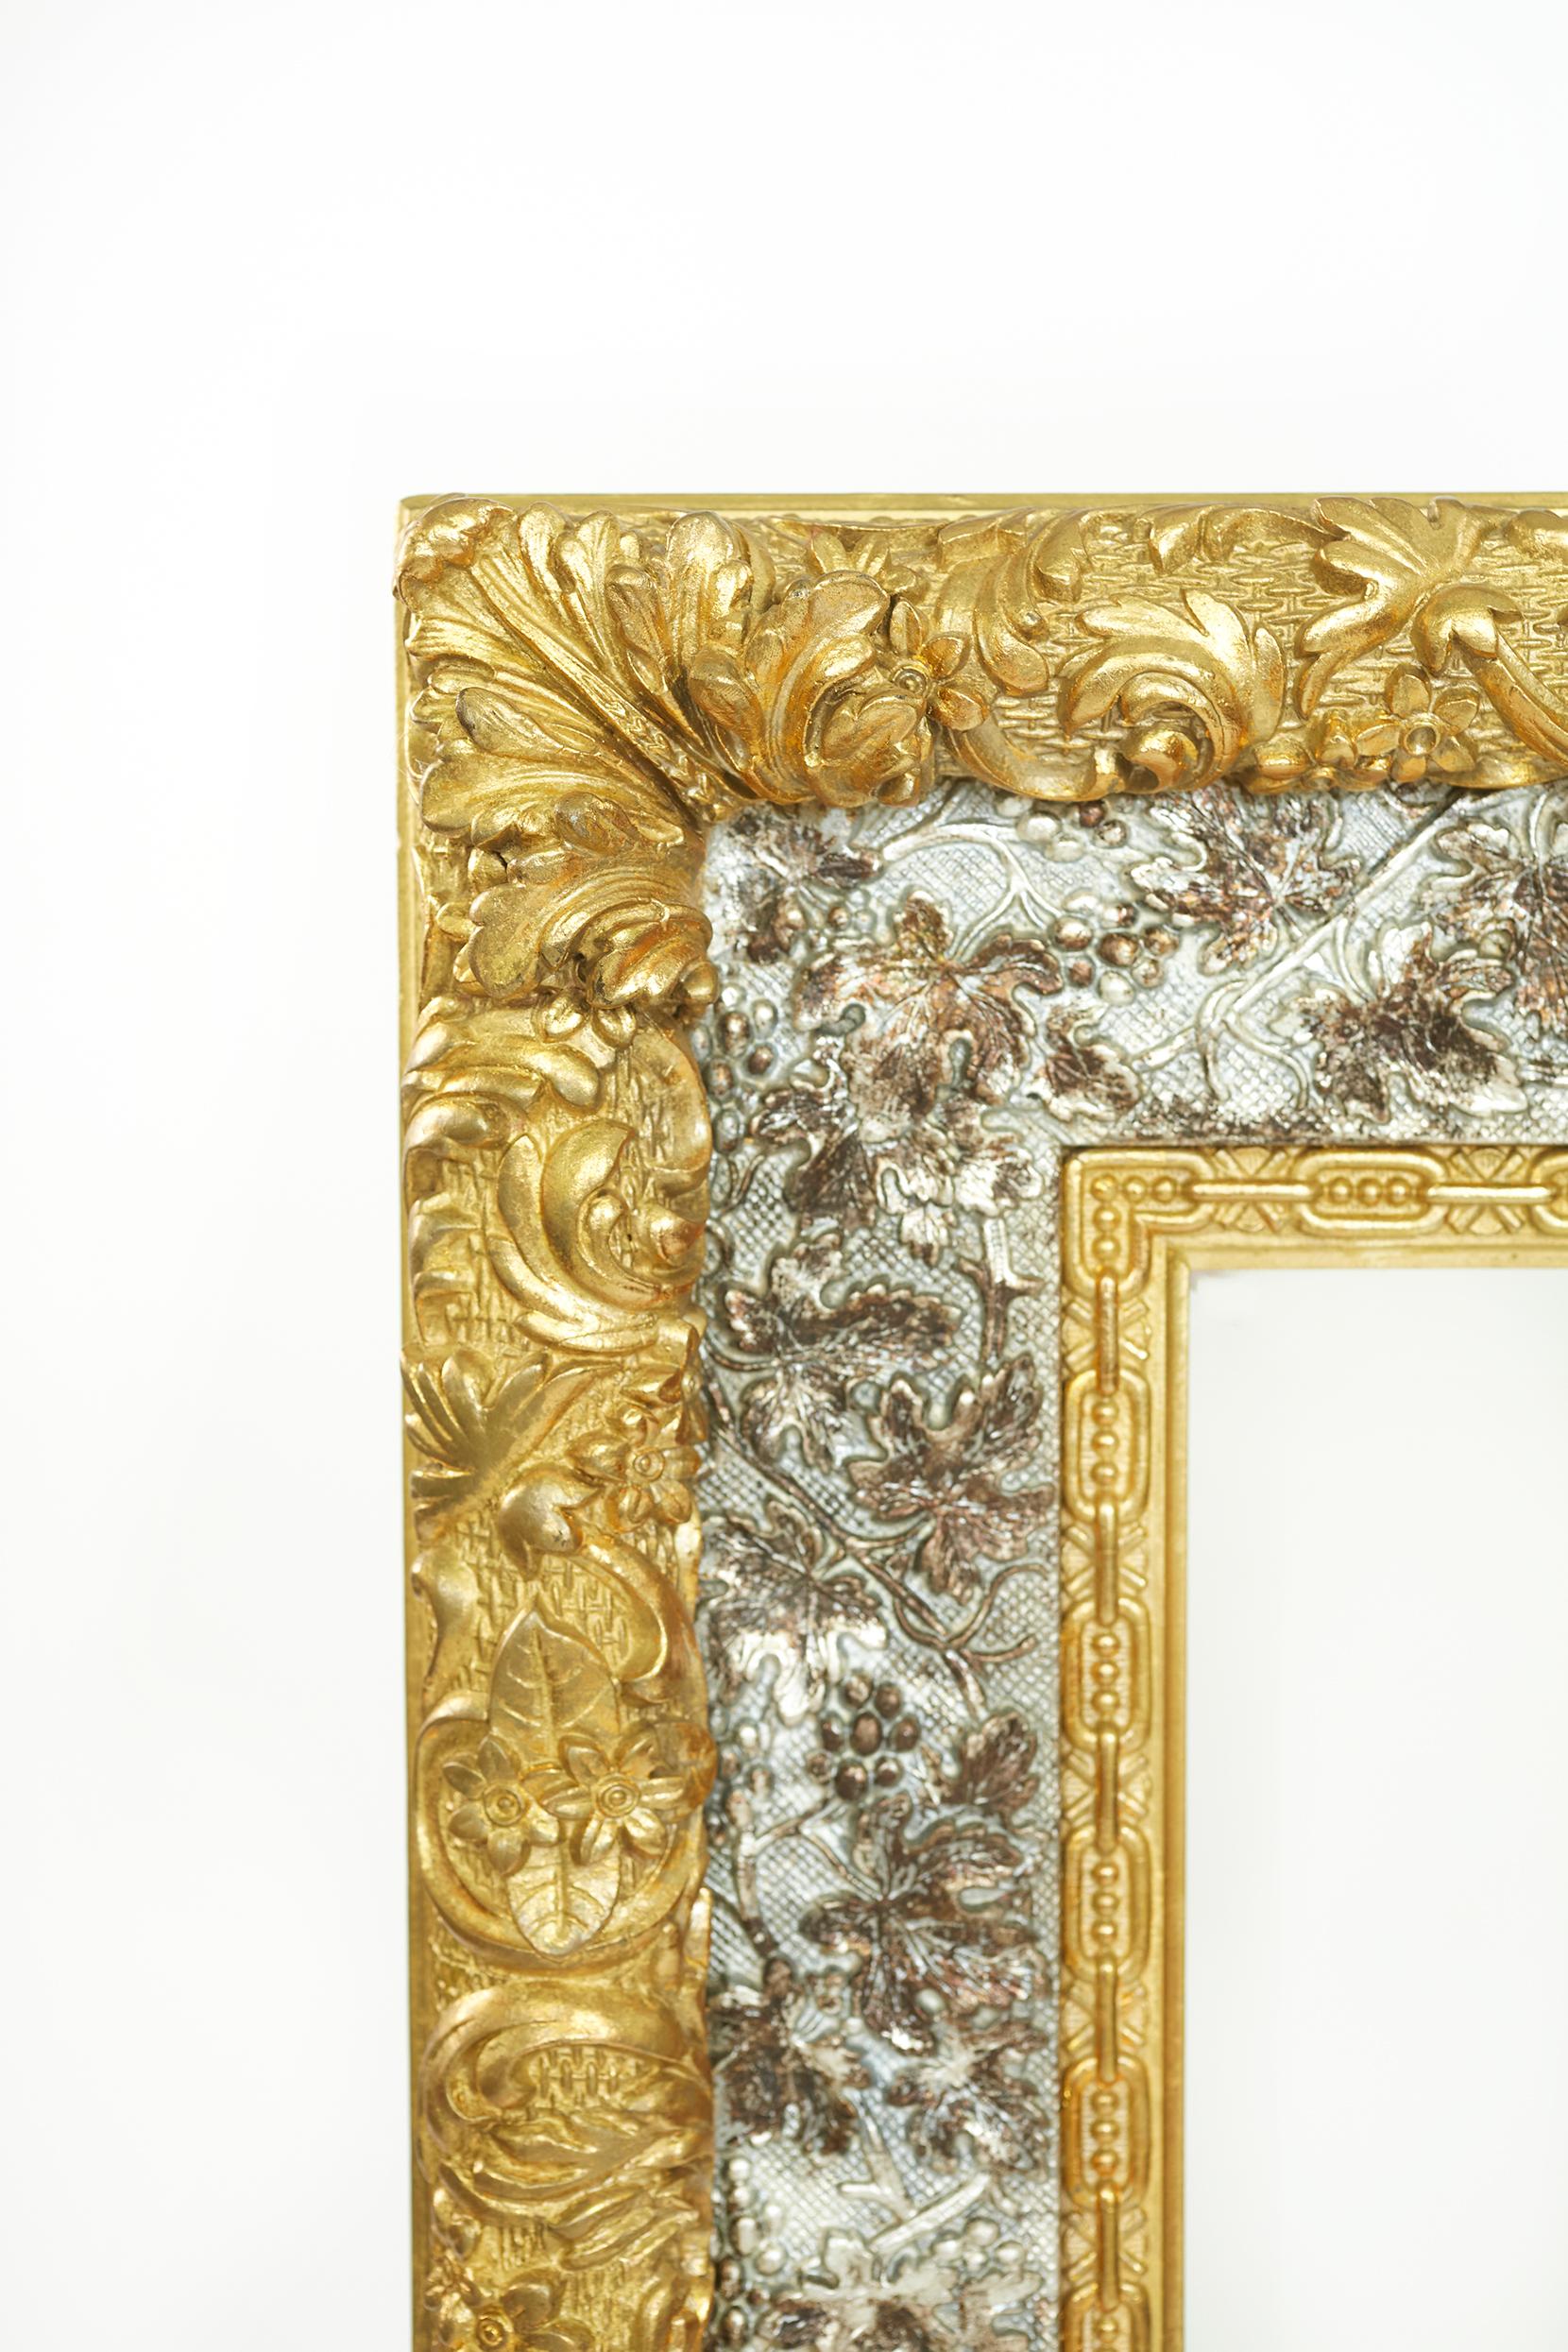 19th Century Gilt Wood Framed Beveled Wall Mirror In Good Condition For Sale In Tarry Town, NY